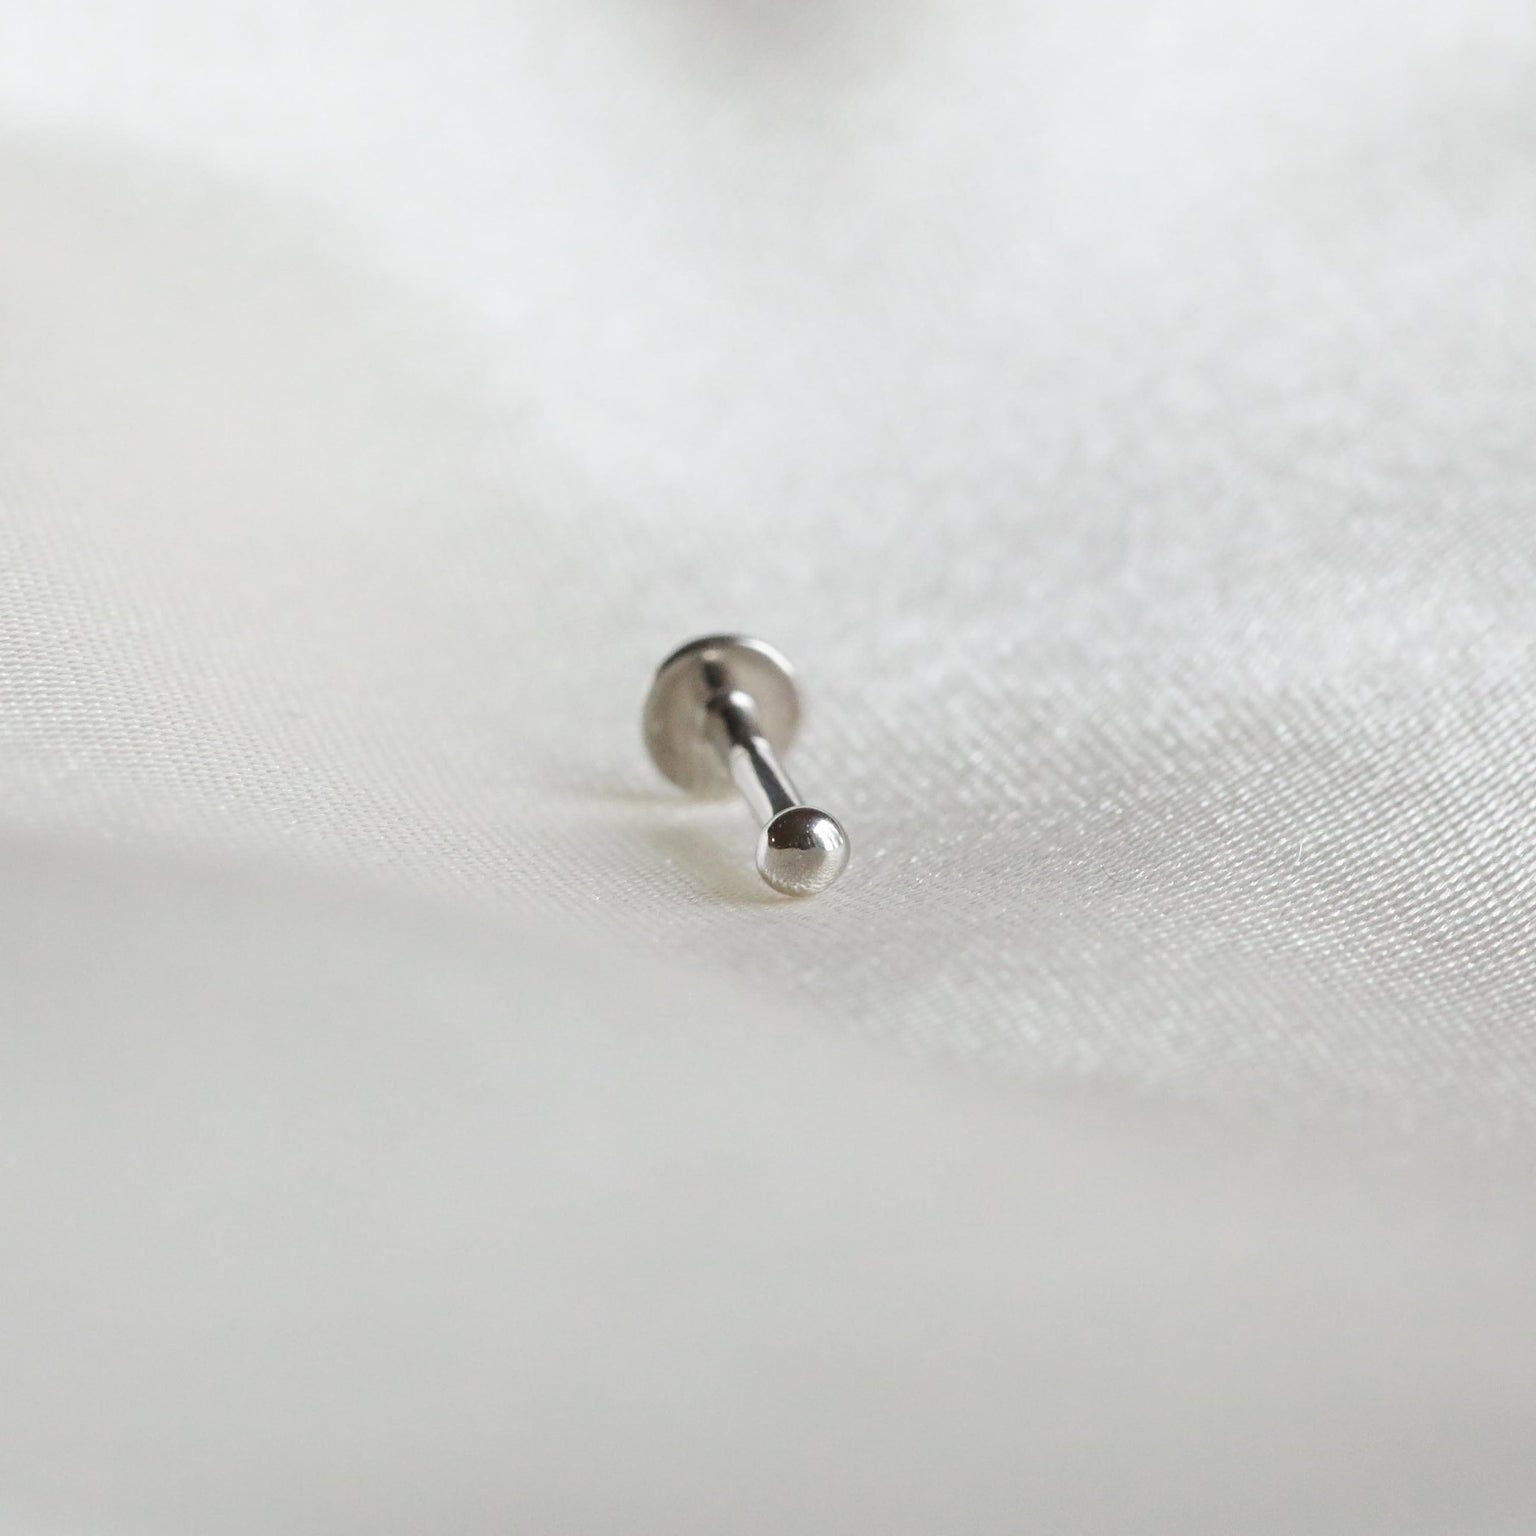 Solid White Gold Large Ball Piercing Stud